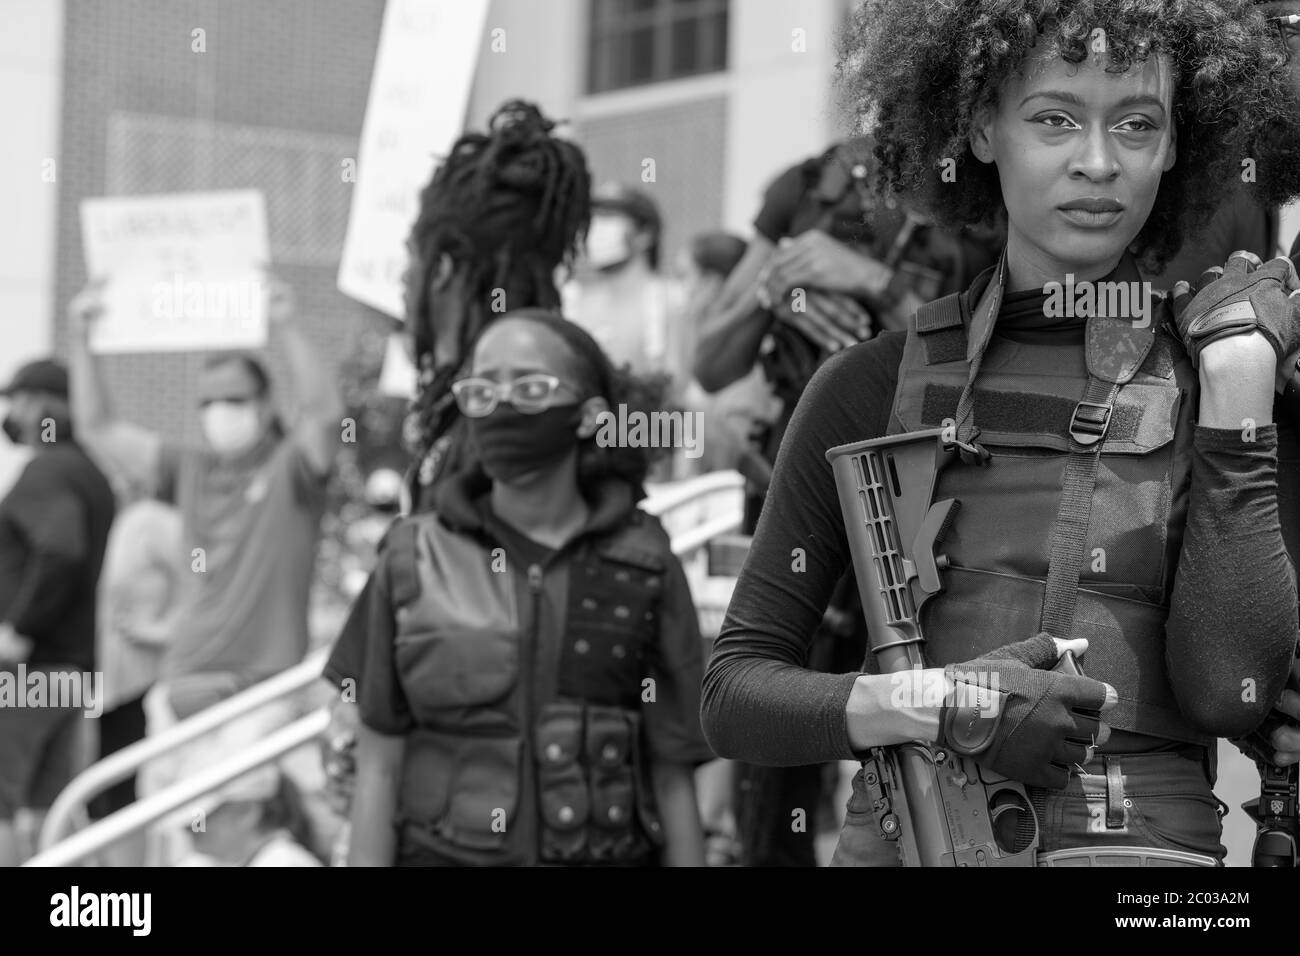 Black Panthers at a BLM protest Stock Photo